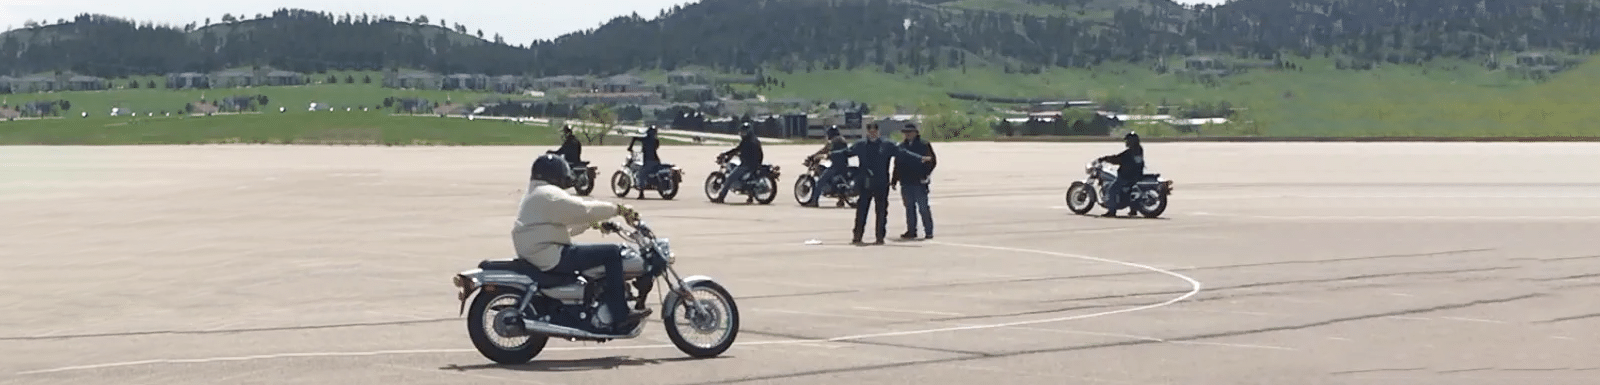 motorcycle training class with rider practicing turns while other riders wait in the background and 2 instructors giving directions in the middle of them